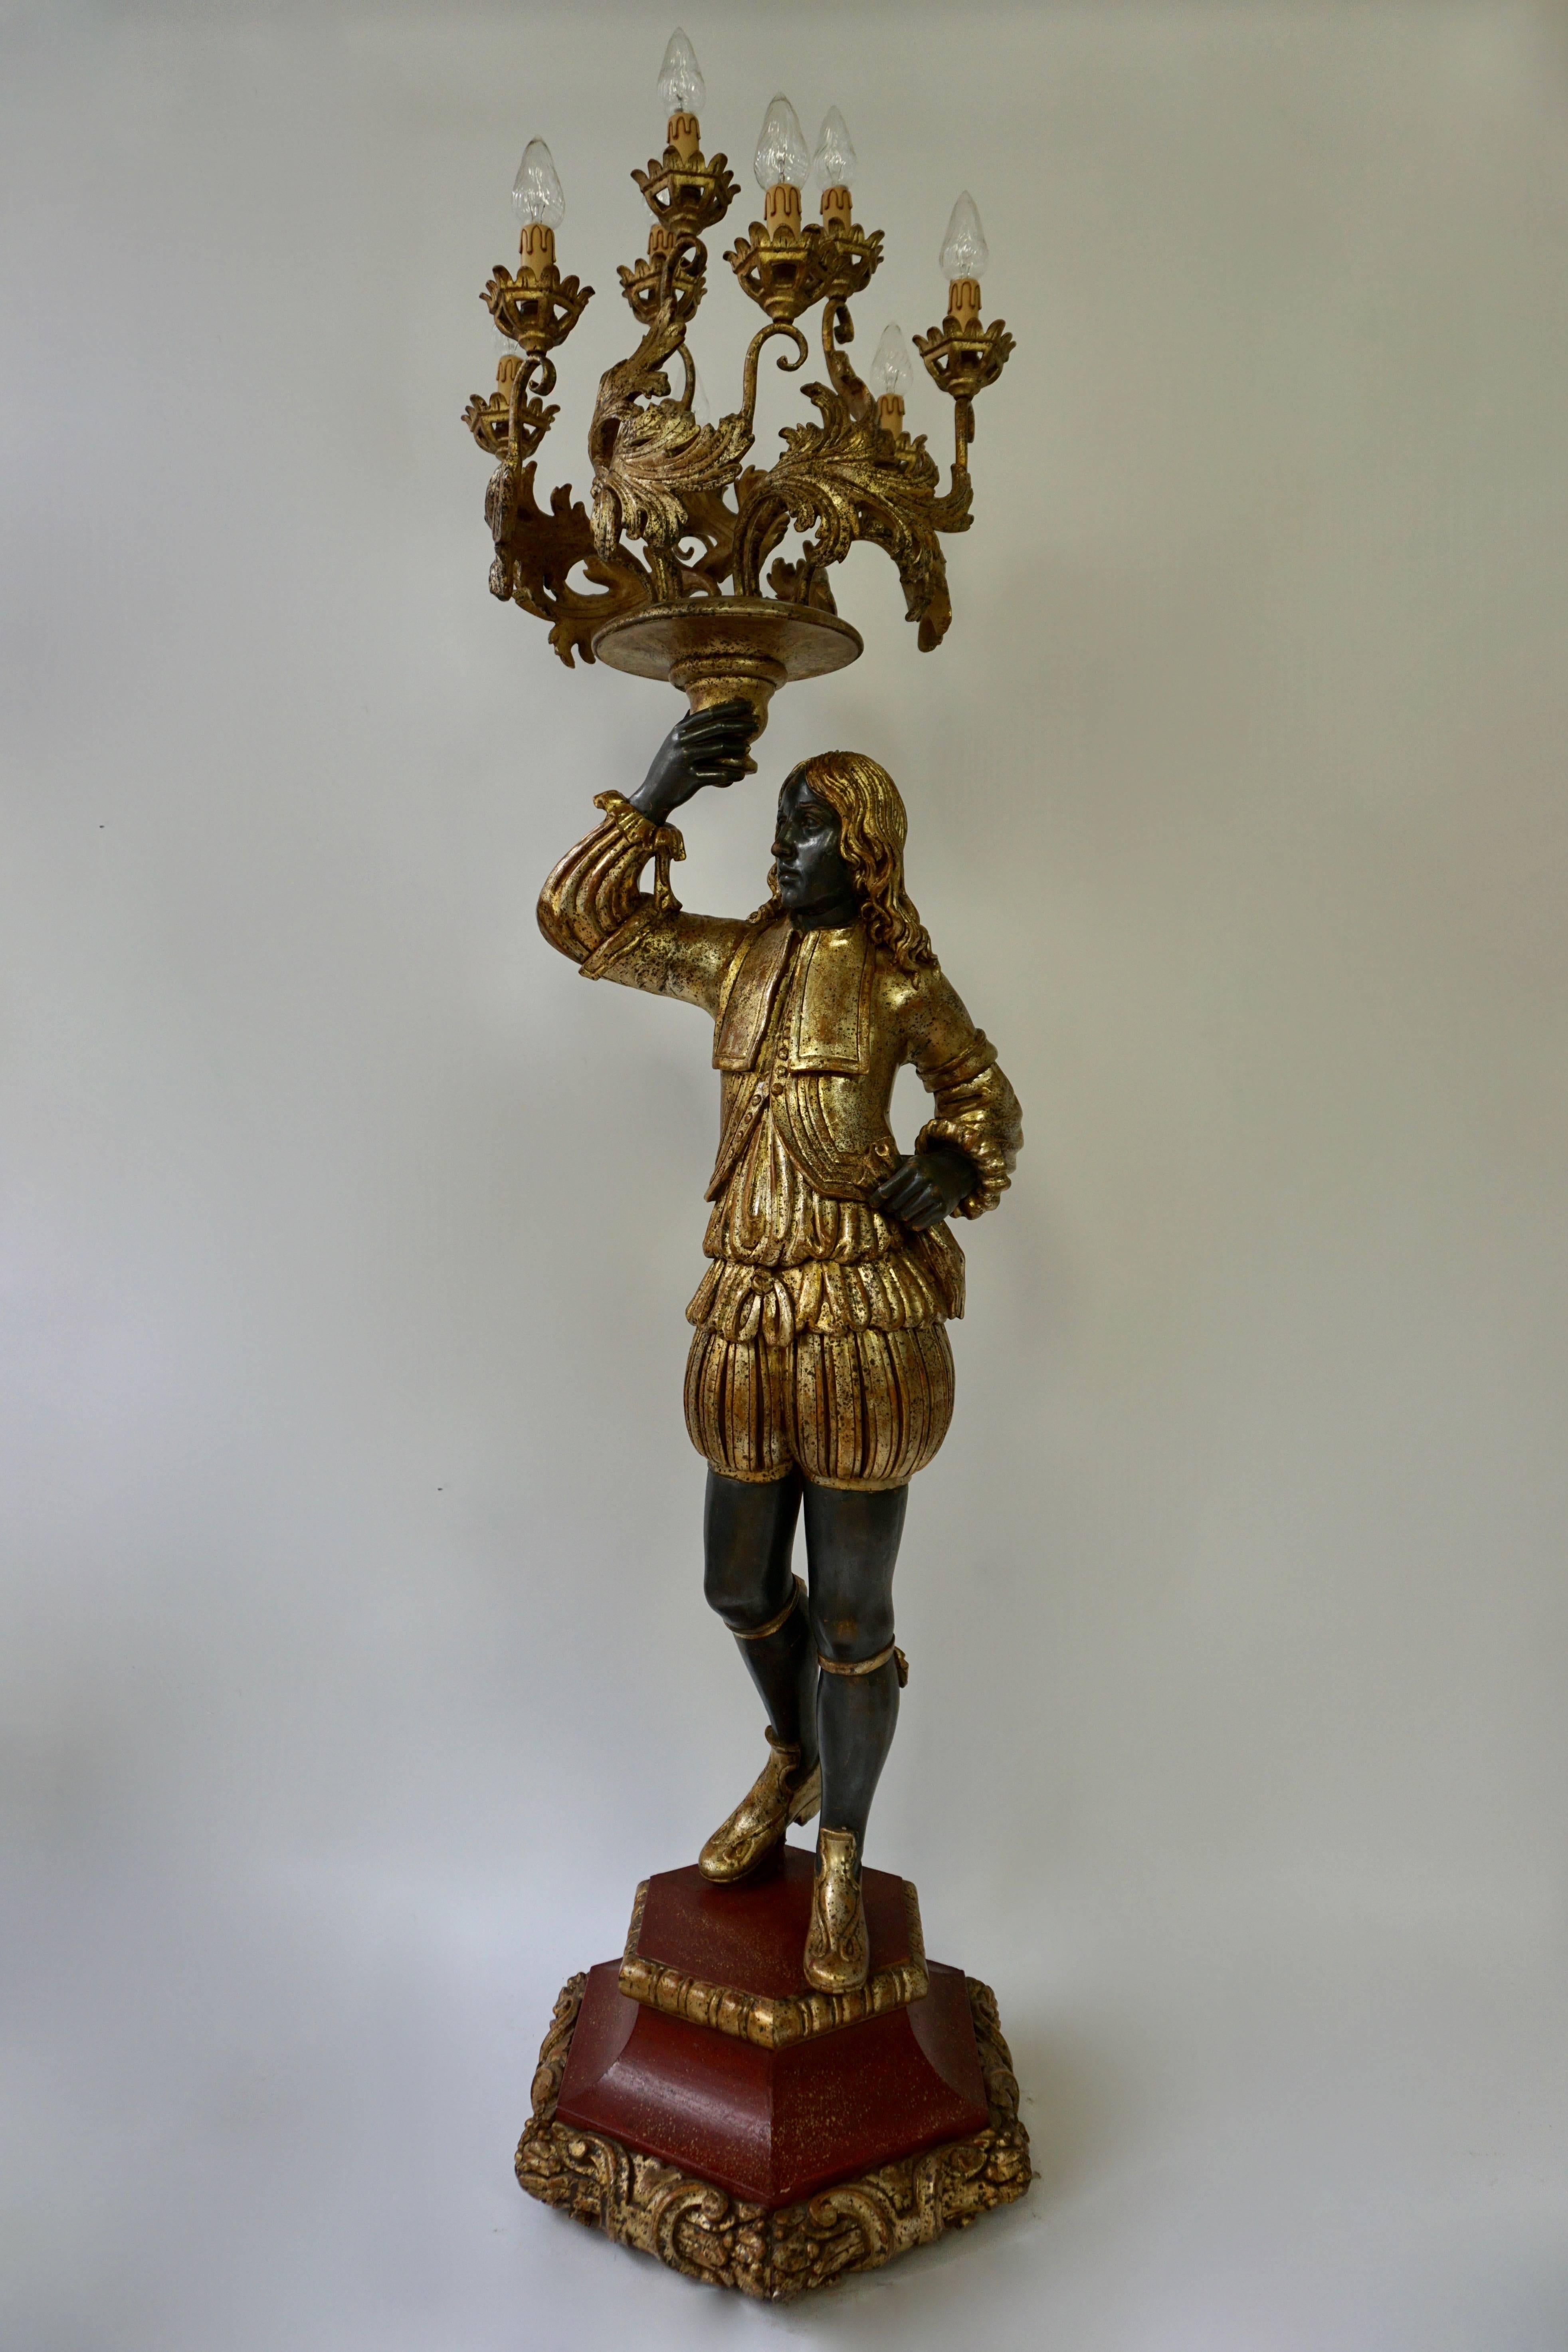 This is an exquisite decorative Venetian style candelabra floor lamp 

The figure are on decorative gilded wooden stand and holds a large gilded candelabra above it's head with nine candle light bulbs.

Dimensions in cm:
Height 194 cm x width